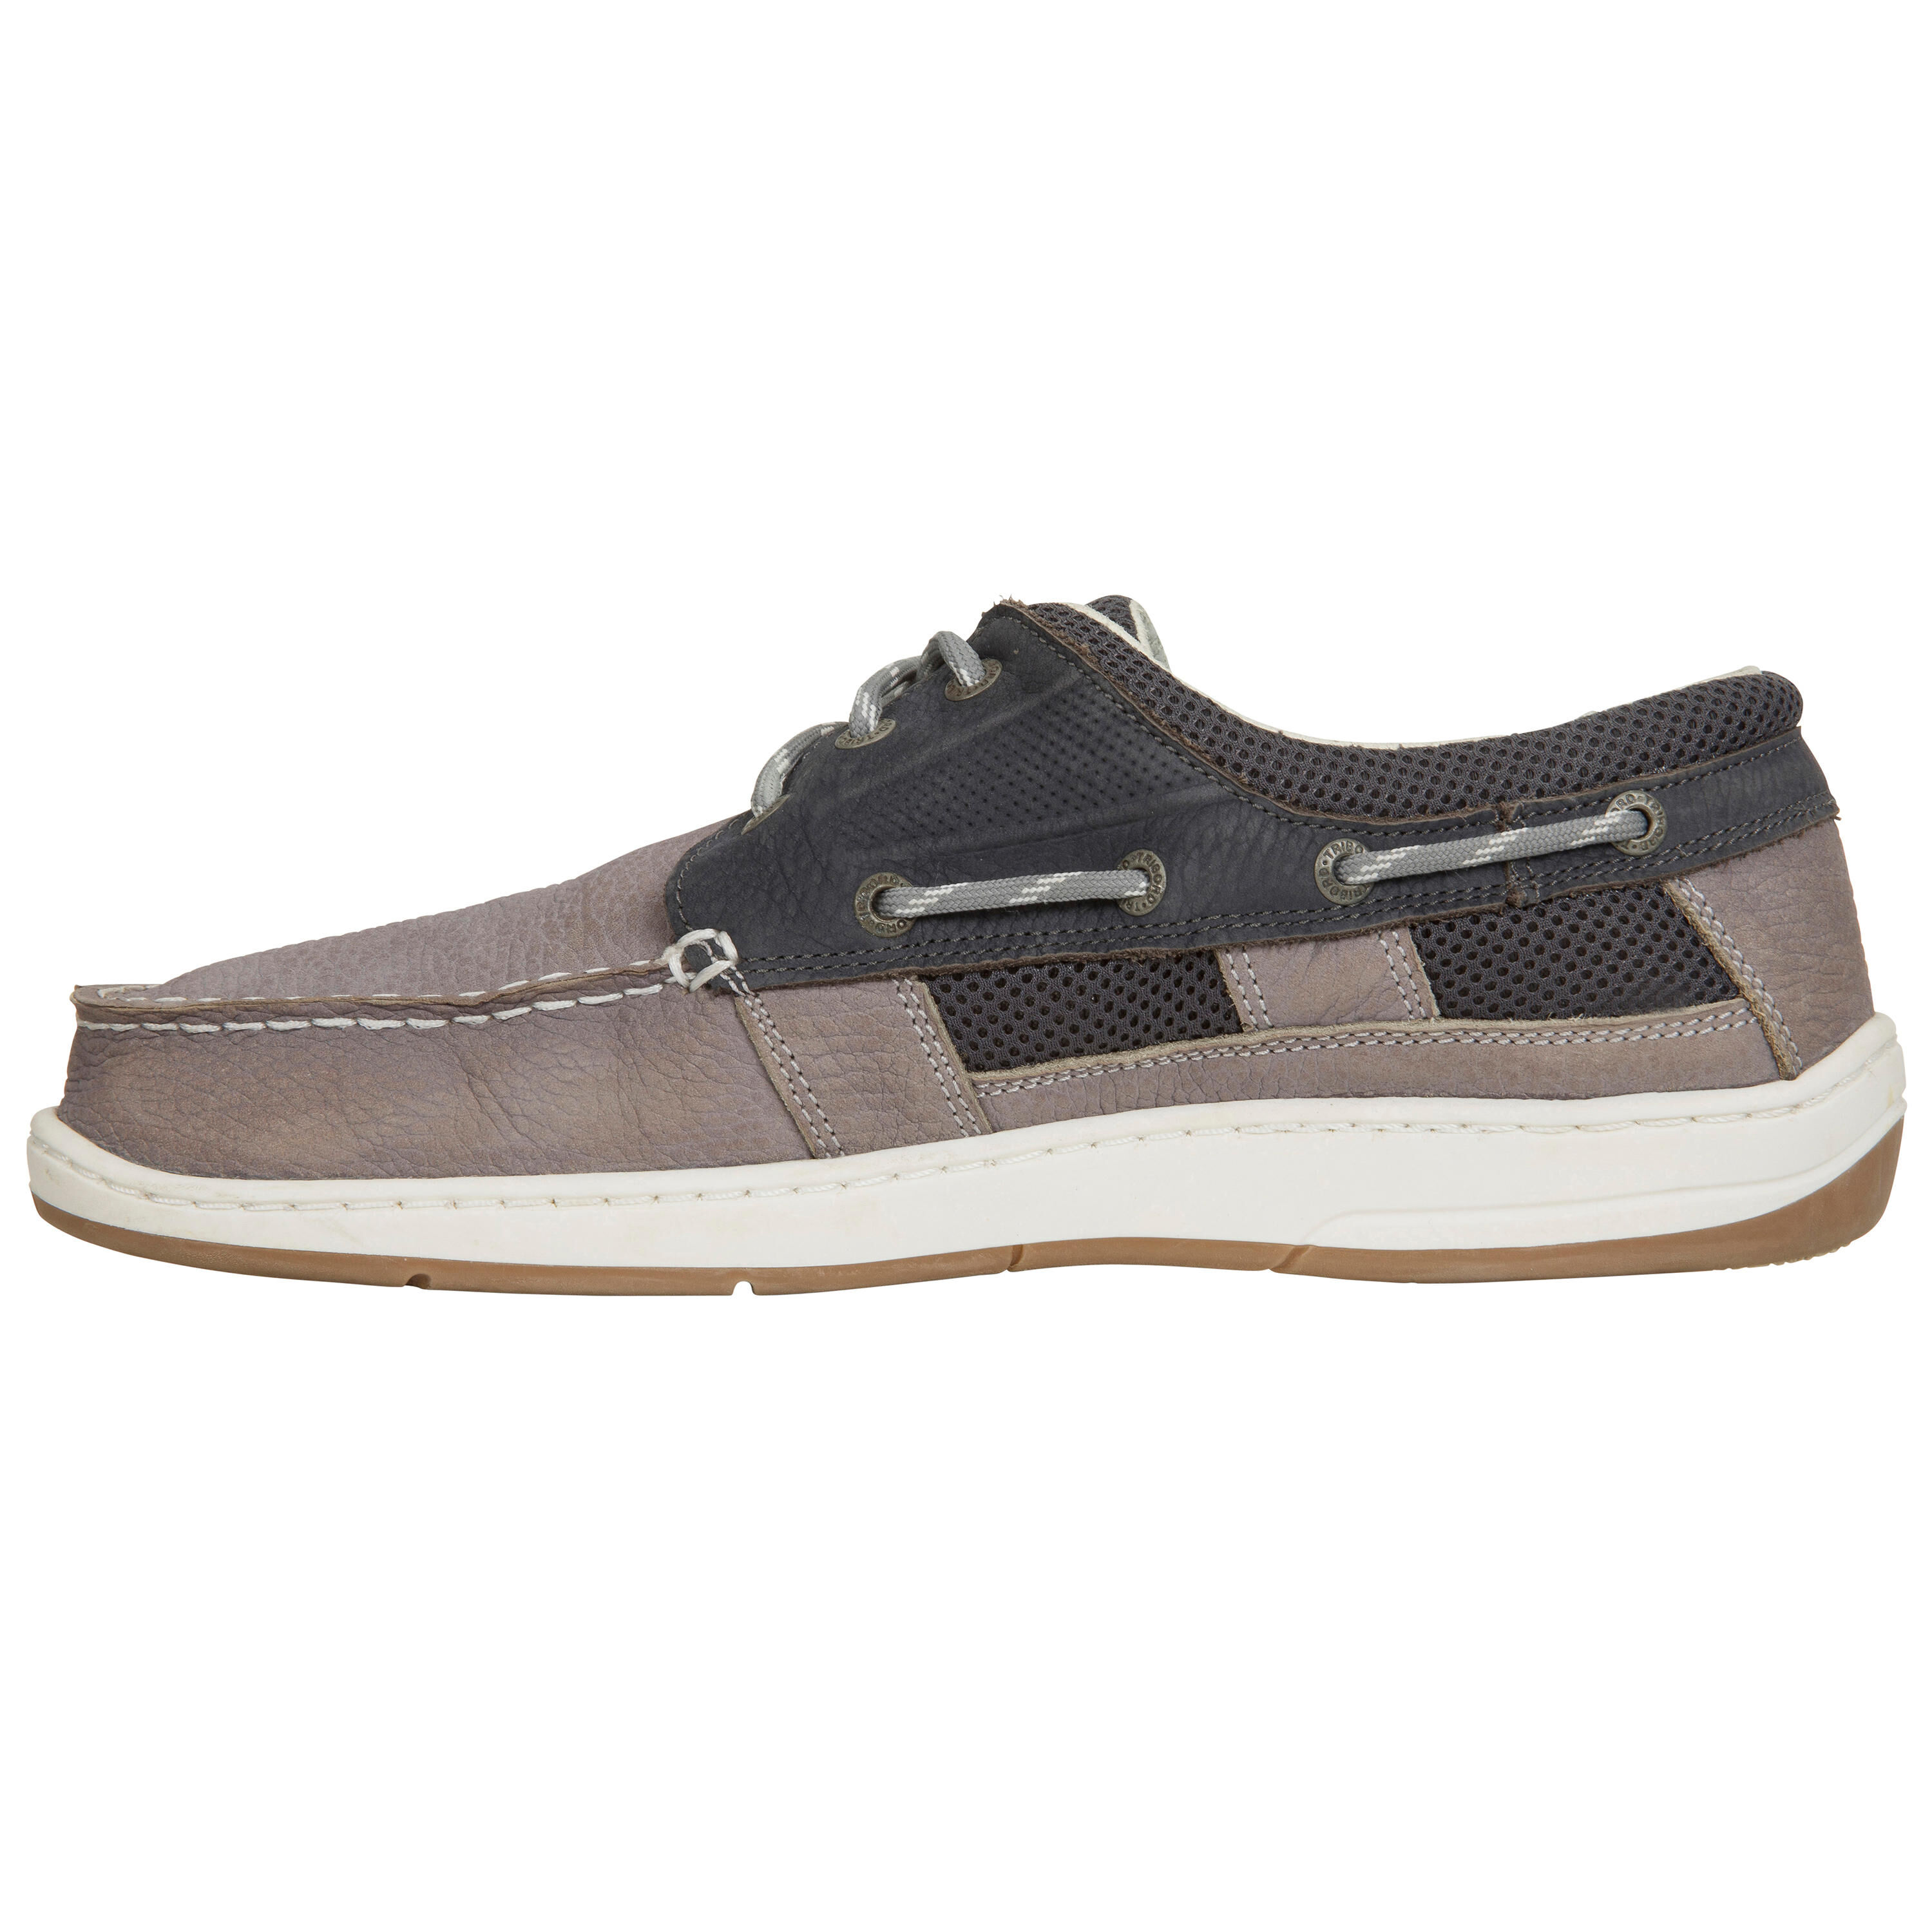 TRIBORD Men's Leather Boat Shoes CLIPPER - Grey